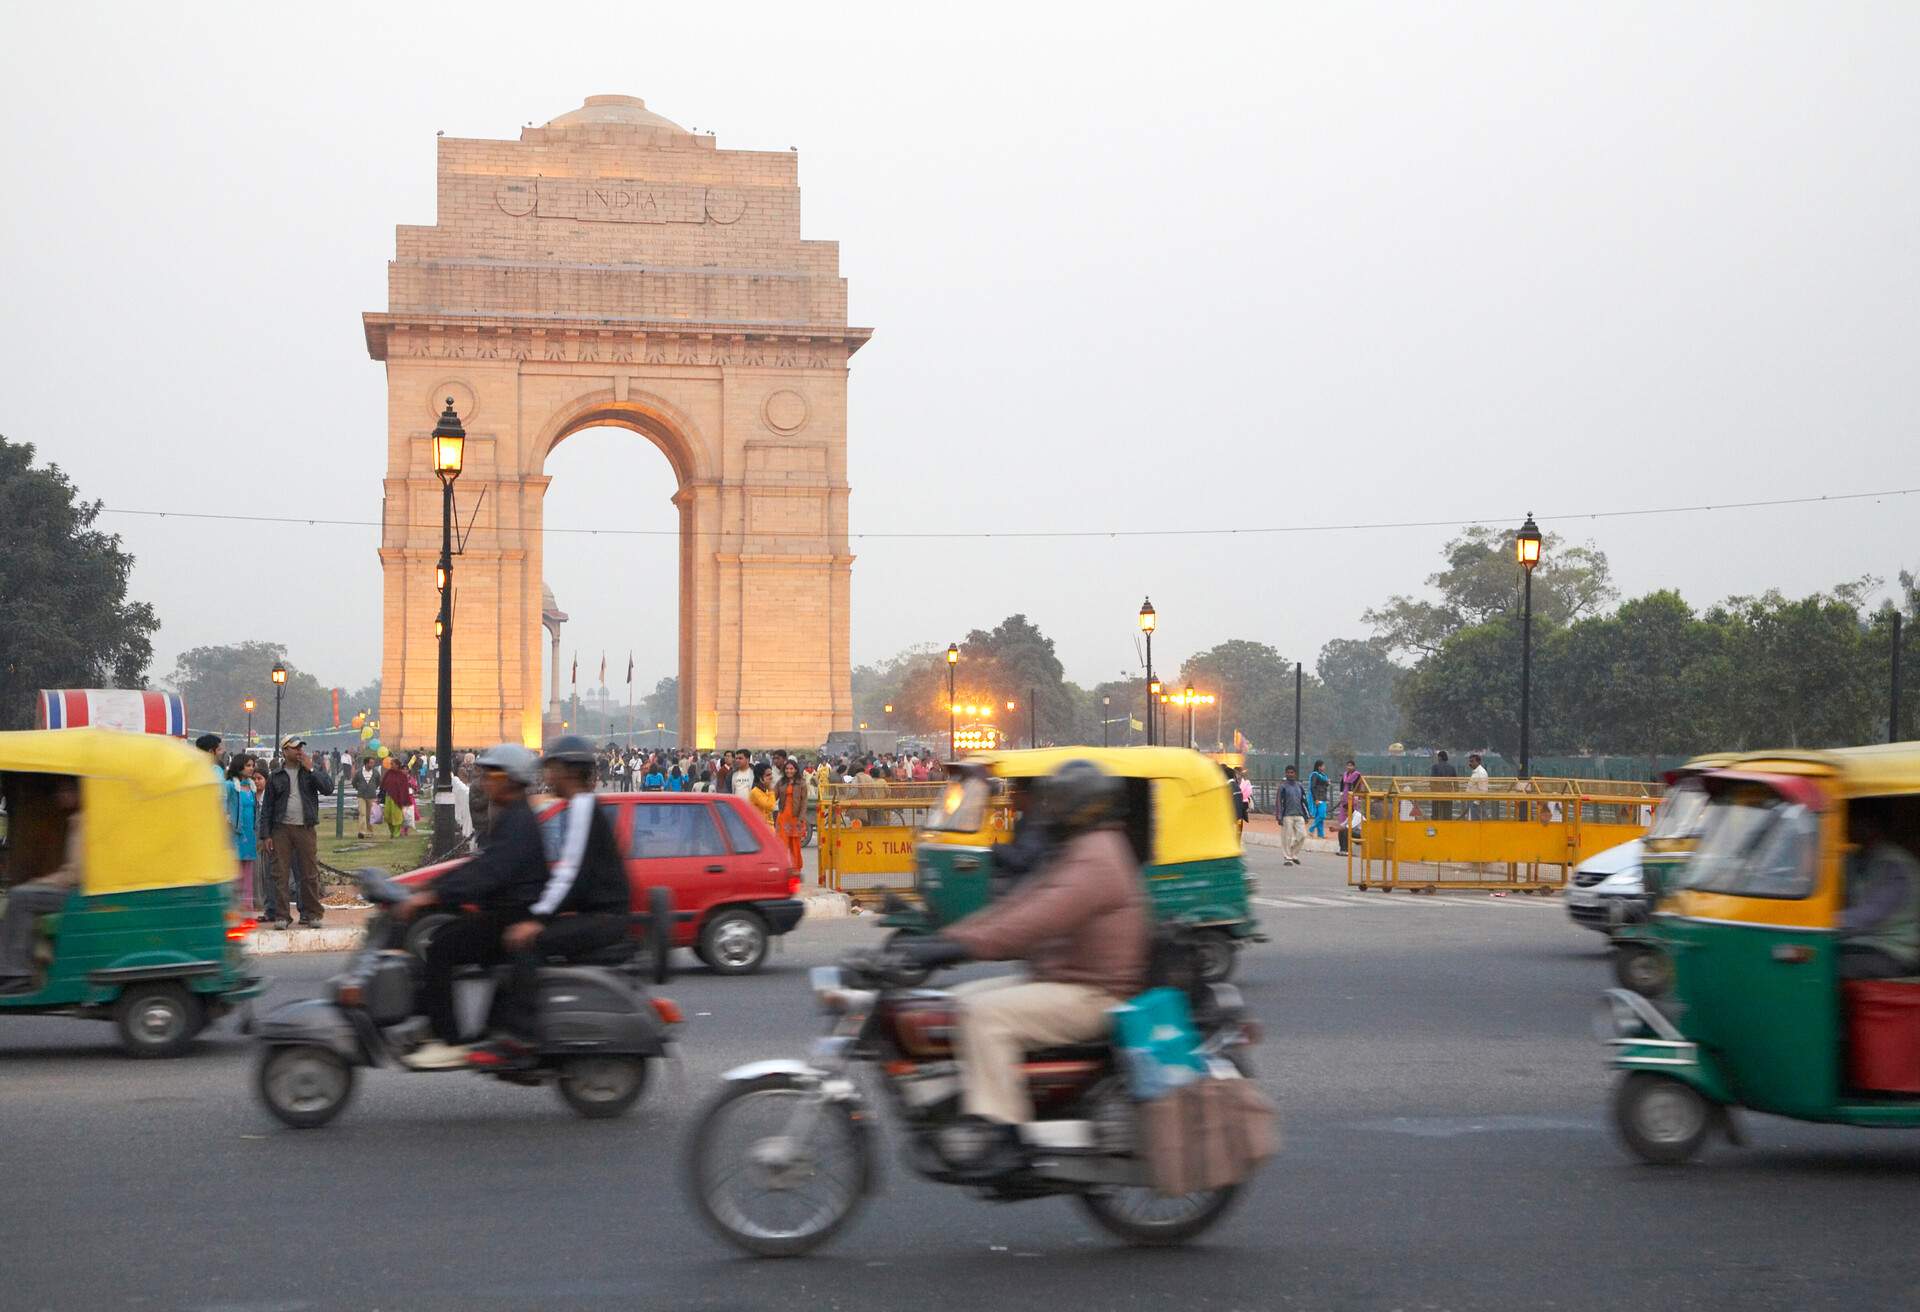 India Gate overlooking busy city street, Delhi, India